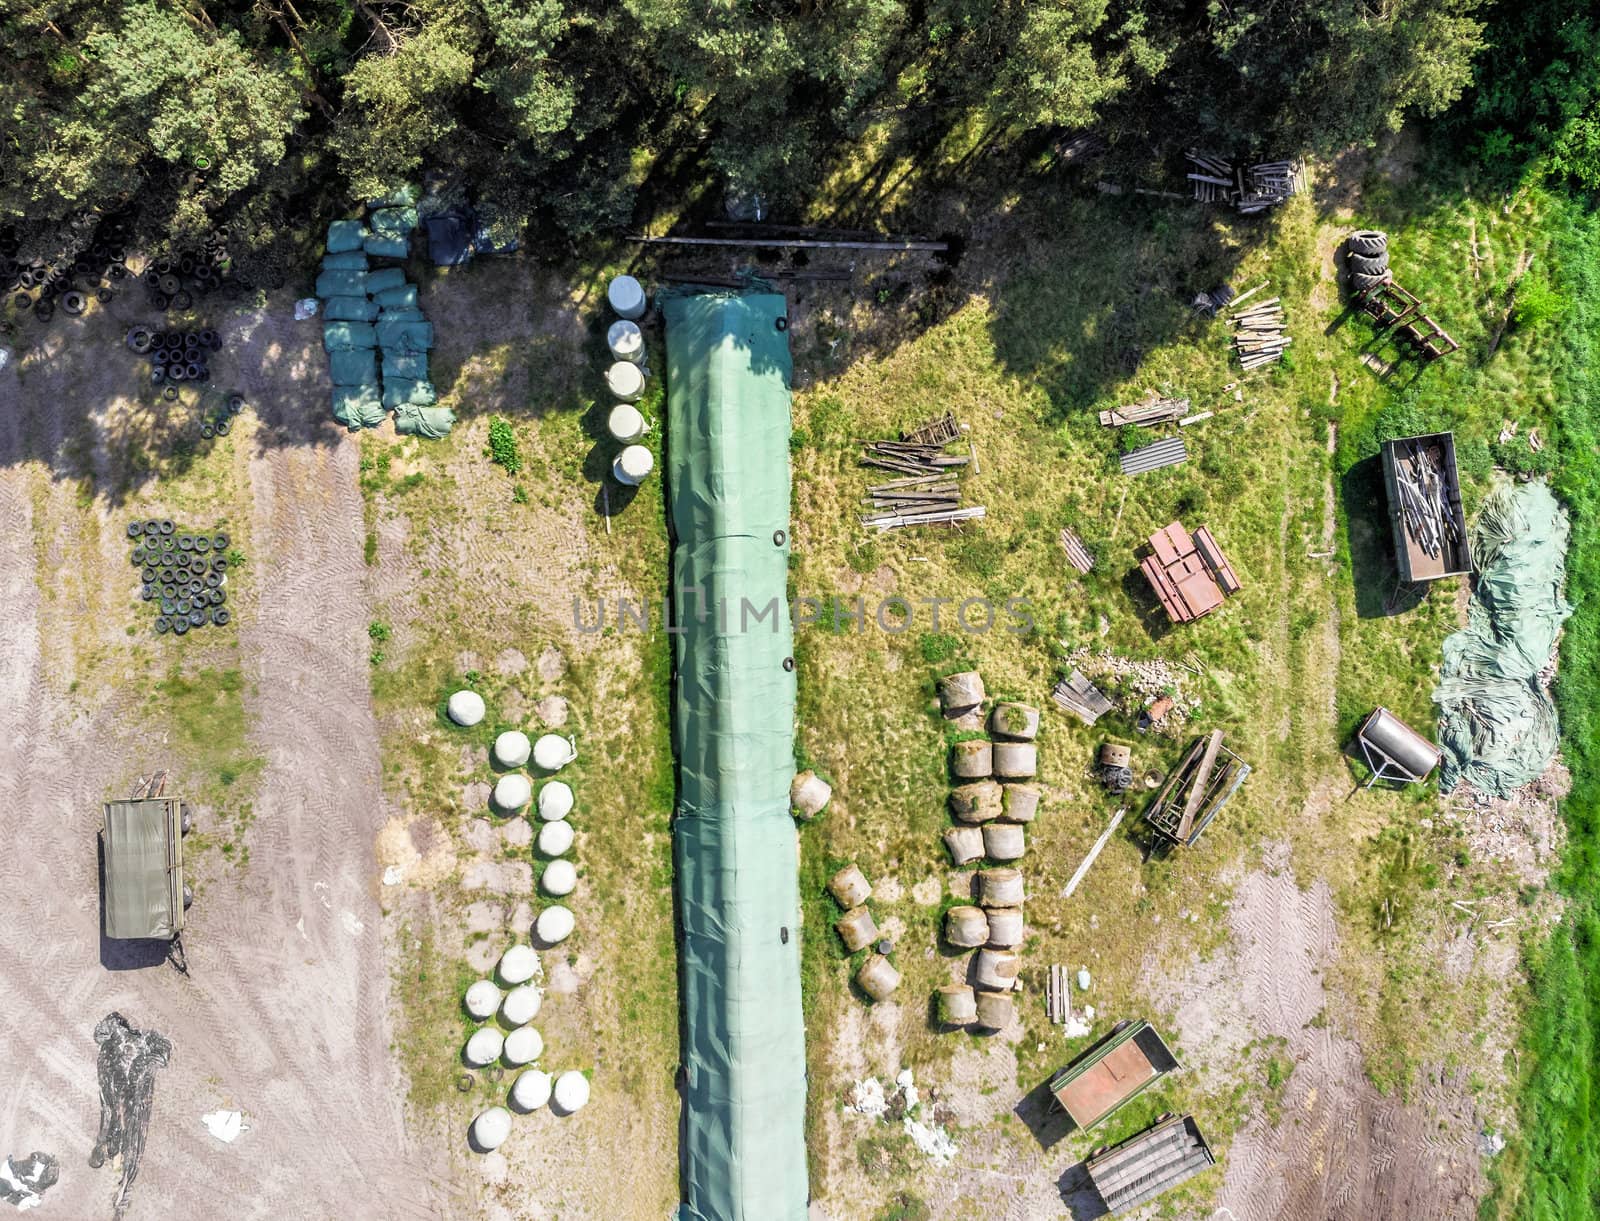 Detailed view from the air of a storage place for a farm, with silage, hay and straw, aerial view by geogif